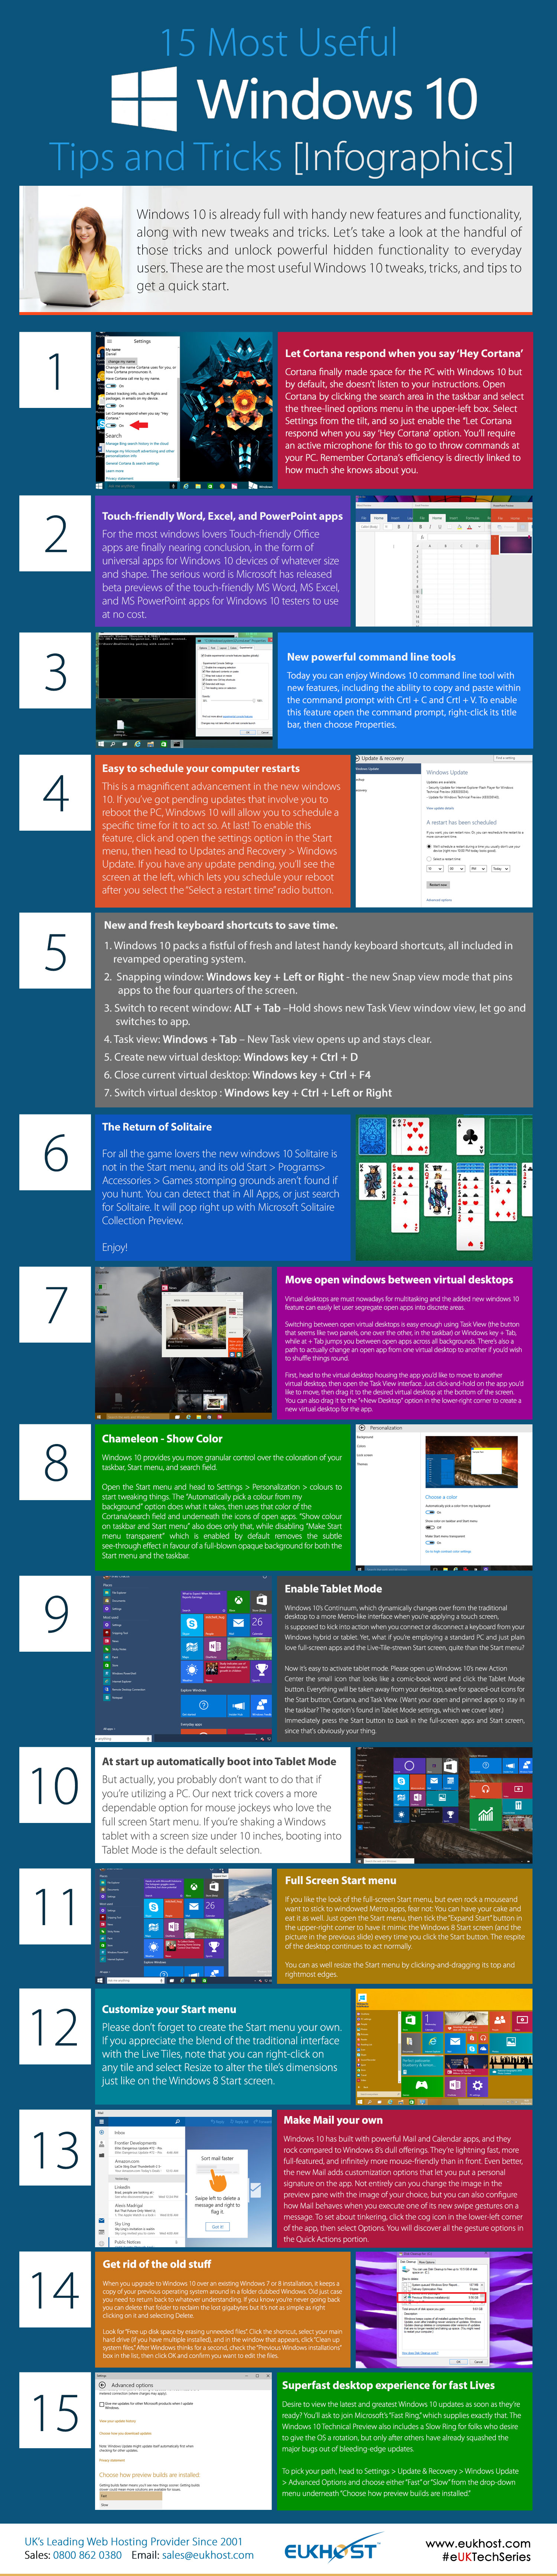 15 Most Useful Windows 10 Tips and Trick [Infographic]